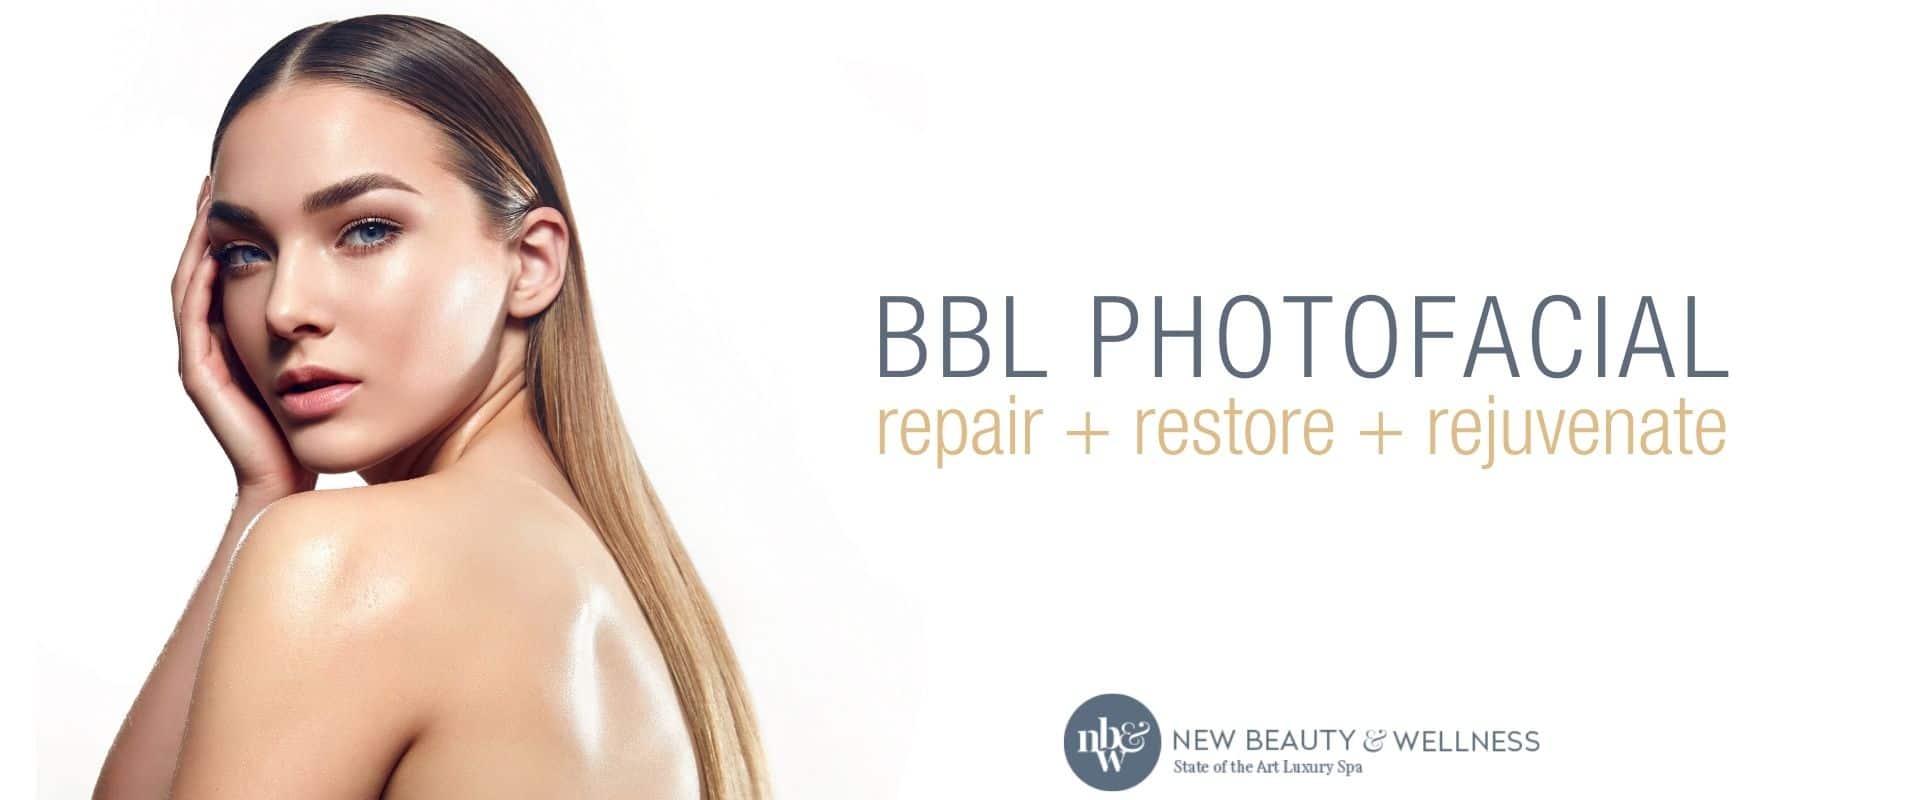 Beautiul woman with clear skin after BBL Photofacial treatment